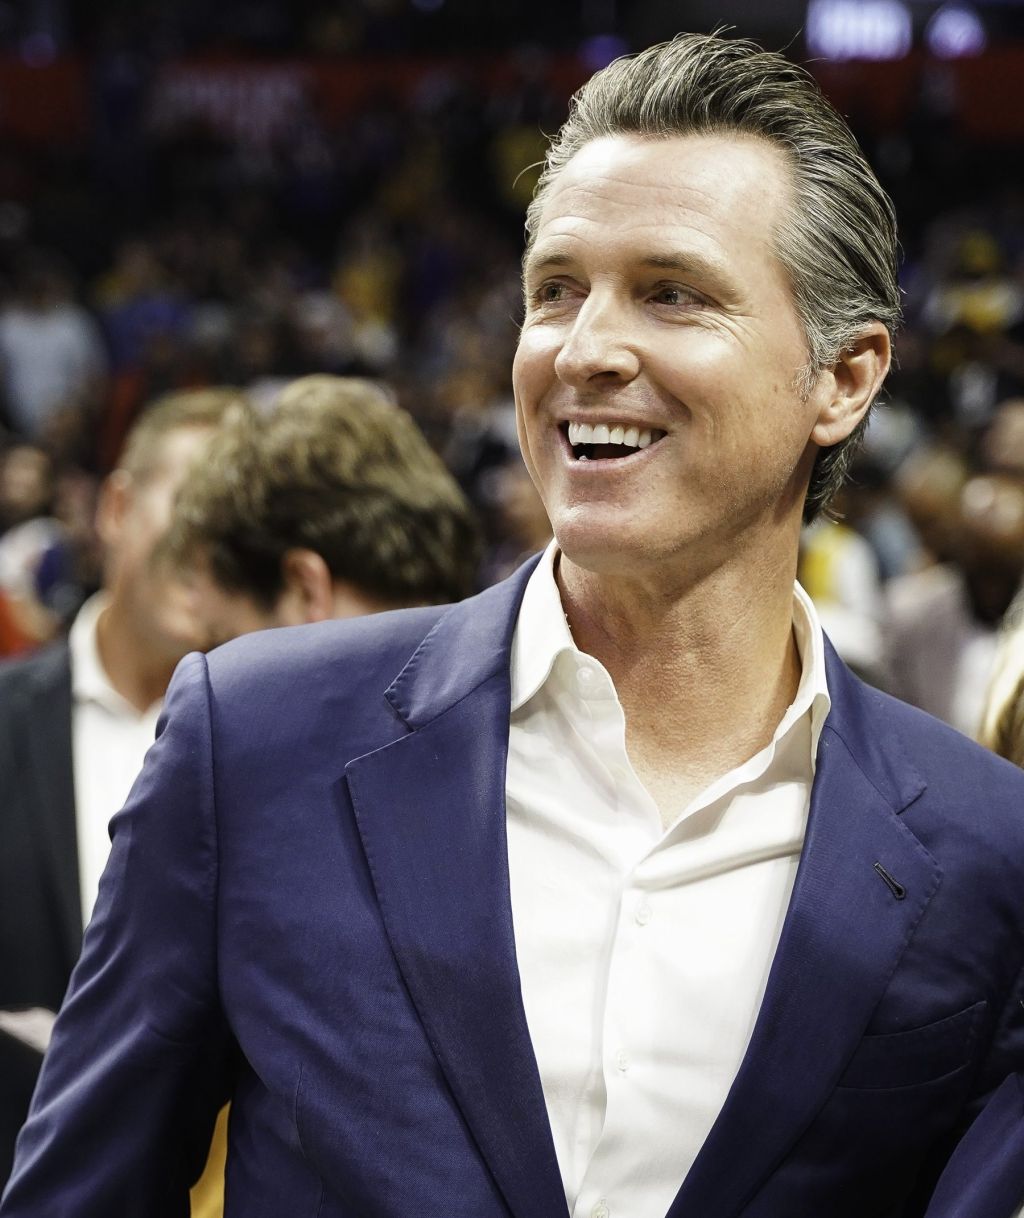 Governor of California Gavin Newsom at the opening game of the NBA season between the Los Angeles Clippers and the Los Angeles Lakers at the Staples Center